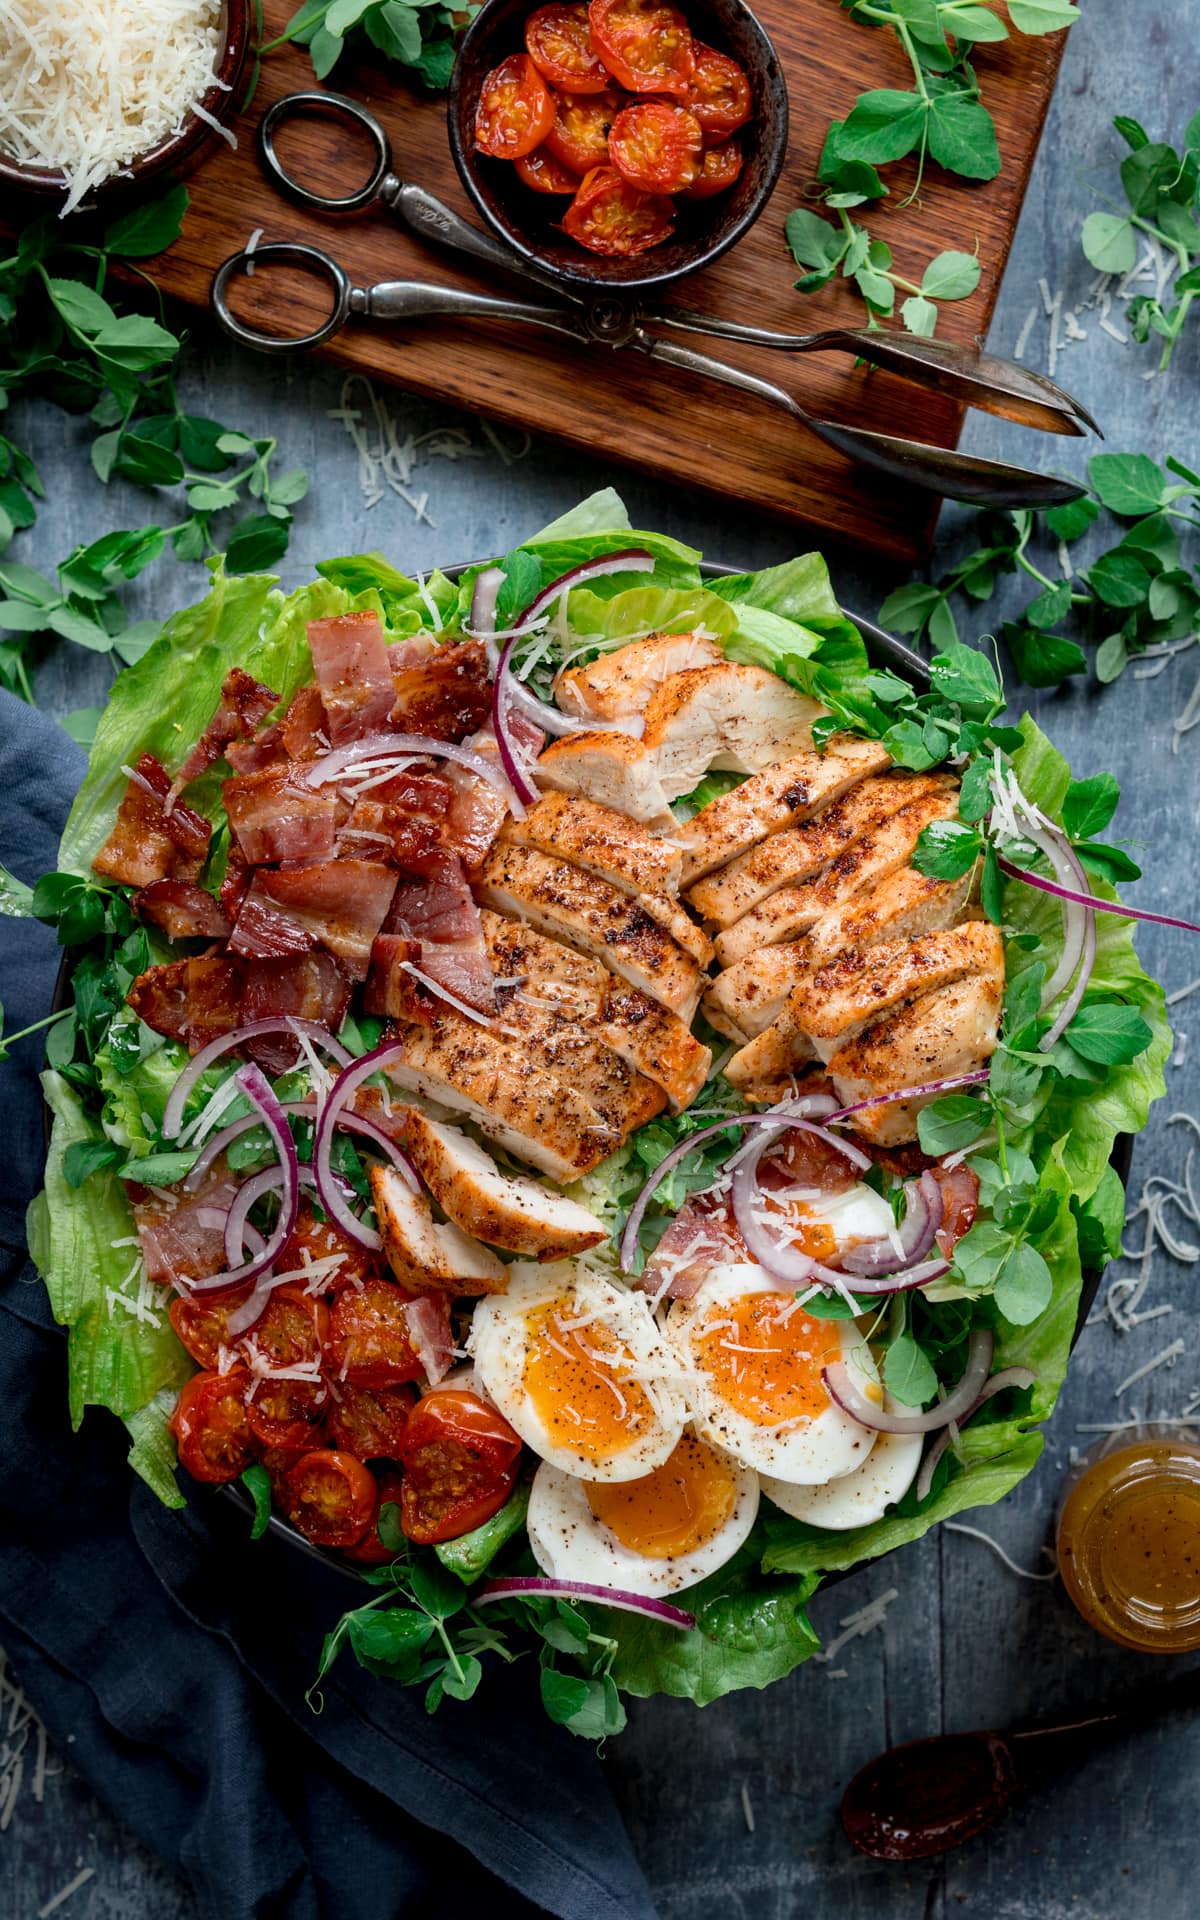 Overhead tall image of a large BLT chicken salad with soft boiled eggs in a bowl on a blue background. The bowls is next to a wooden board that has extra ingredients on it (tomatoes, parmesan and pea shoots), plus some salad servers. There is also a little bottle of salad dressing to the right of the bowl.